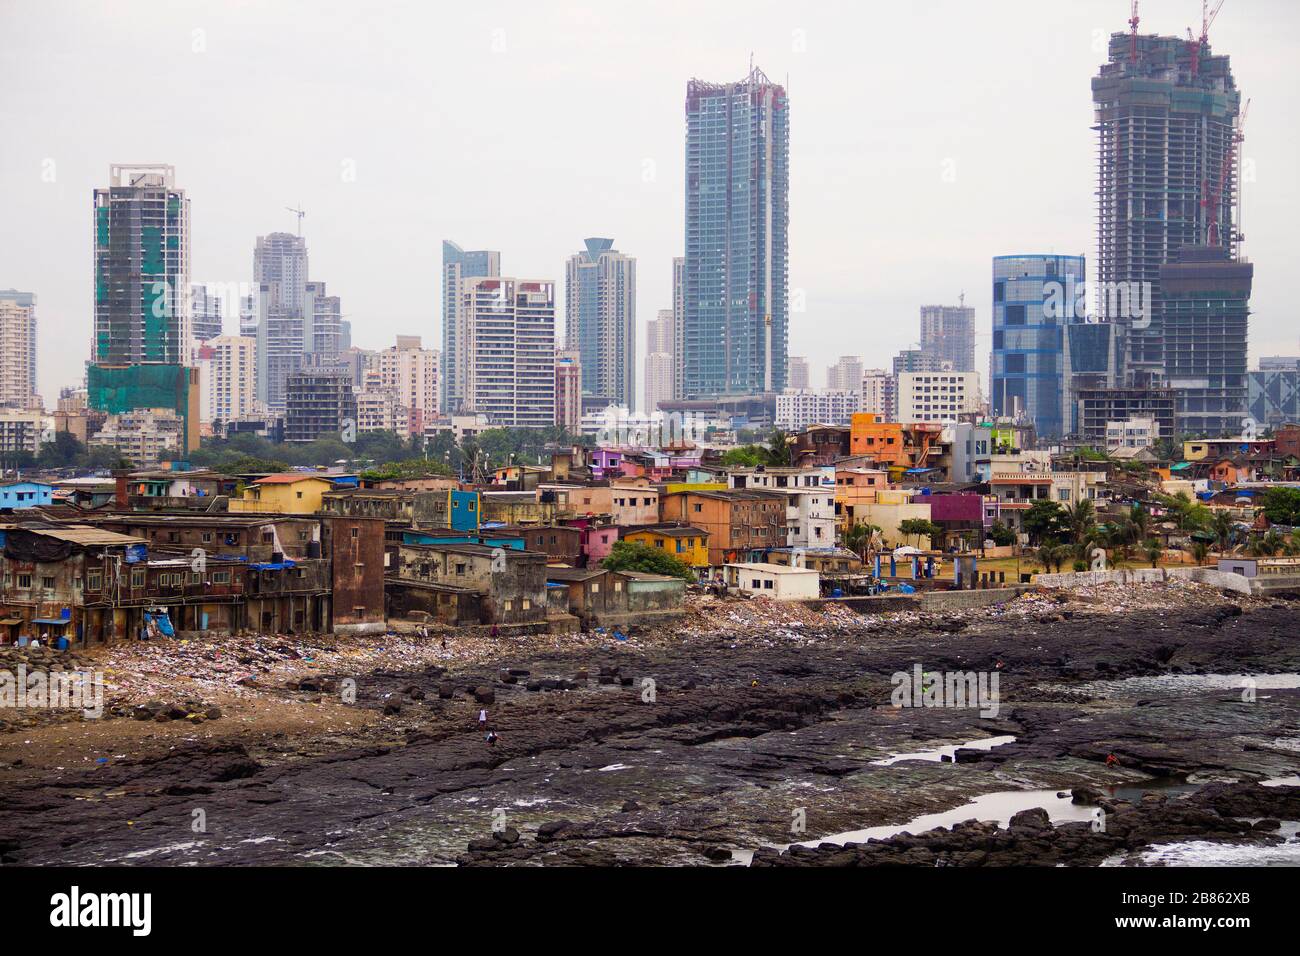 Mumbai fishermen village view with modern glass and steel towers on the background Stock Photo